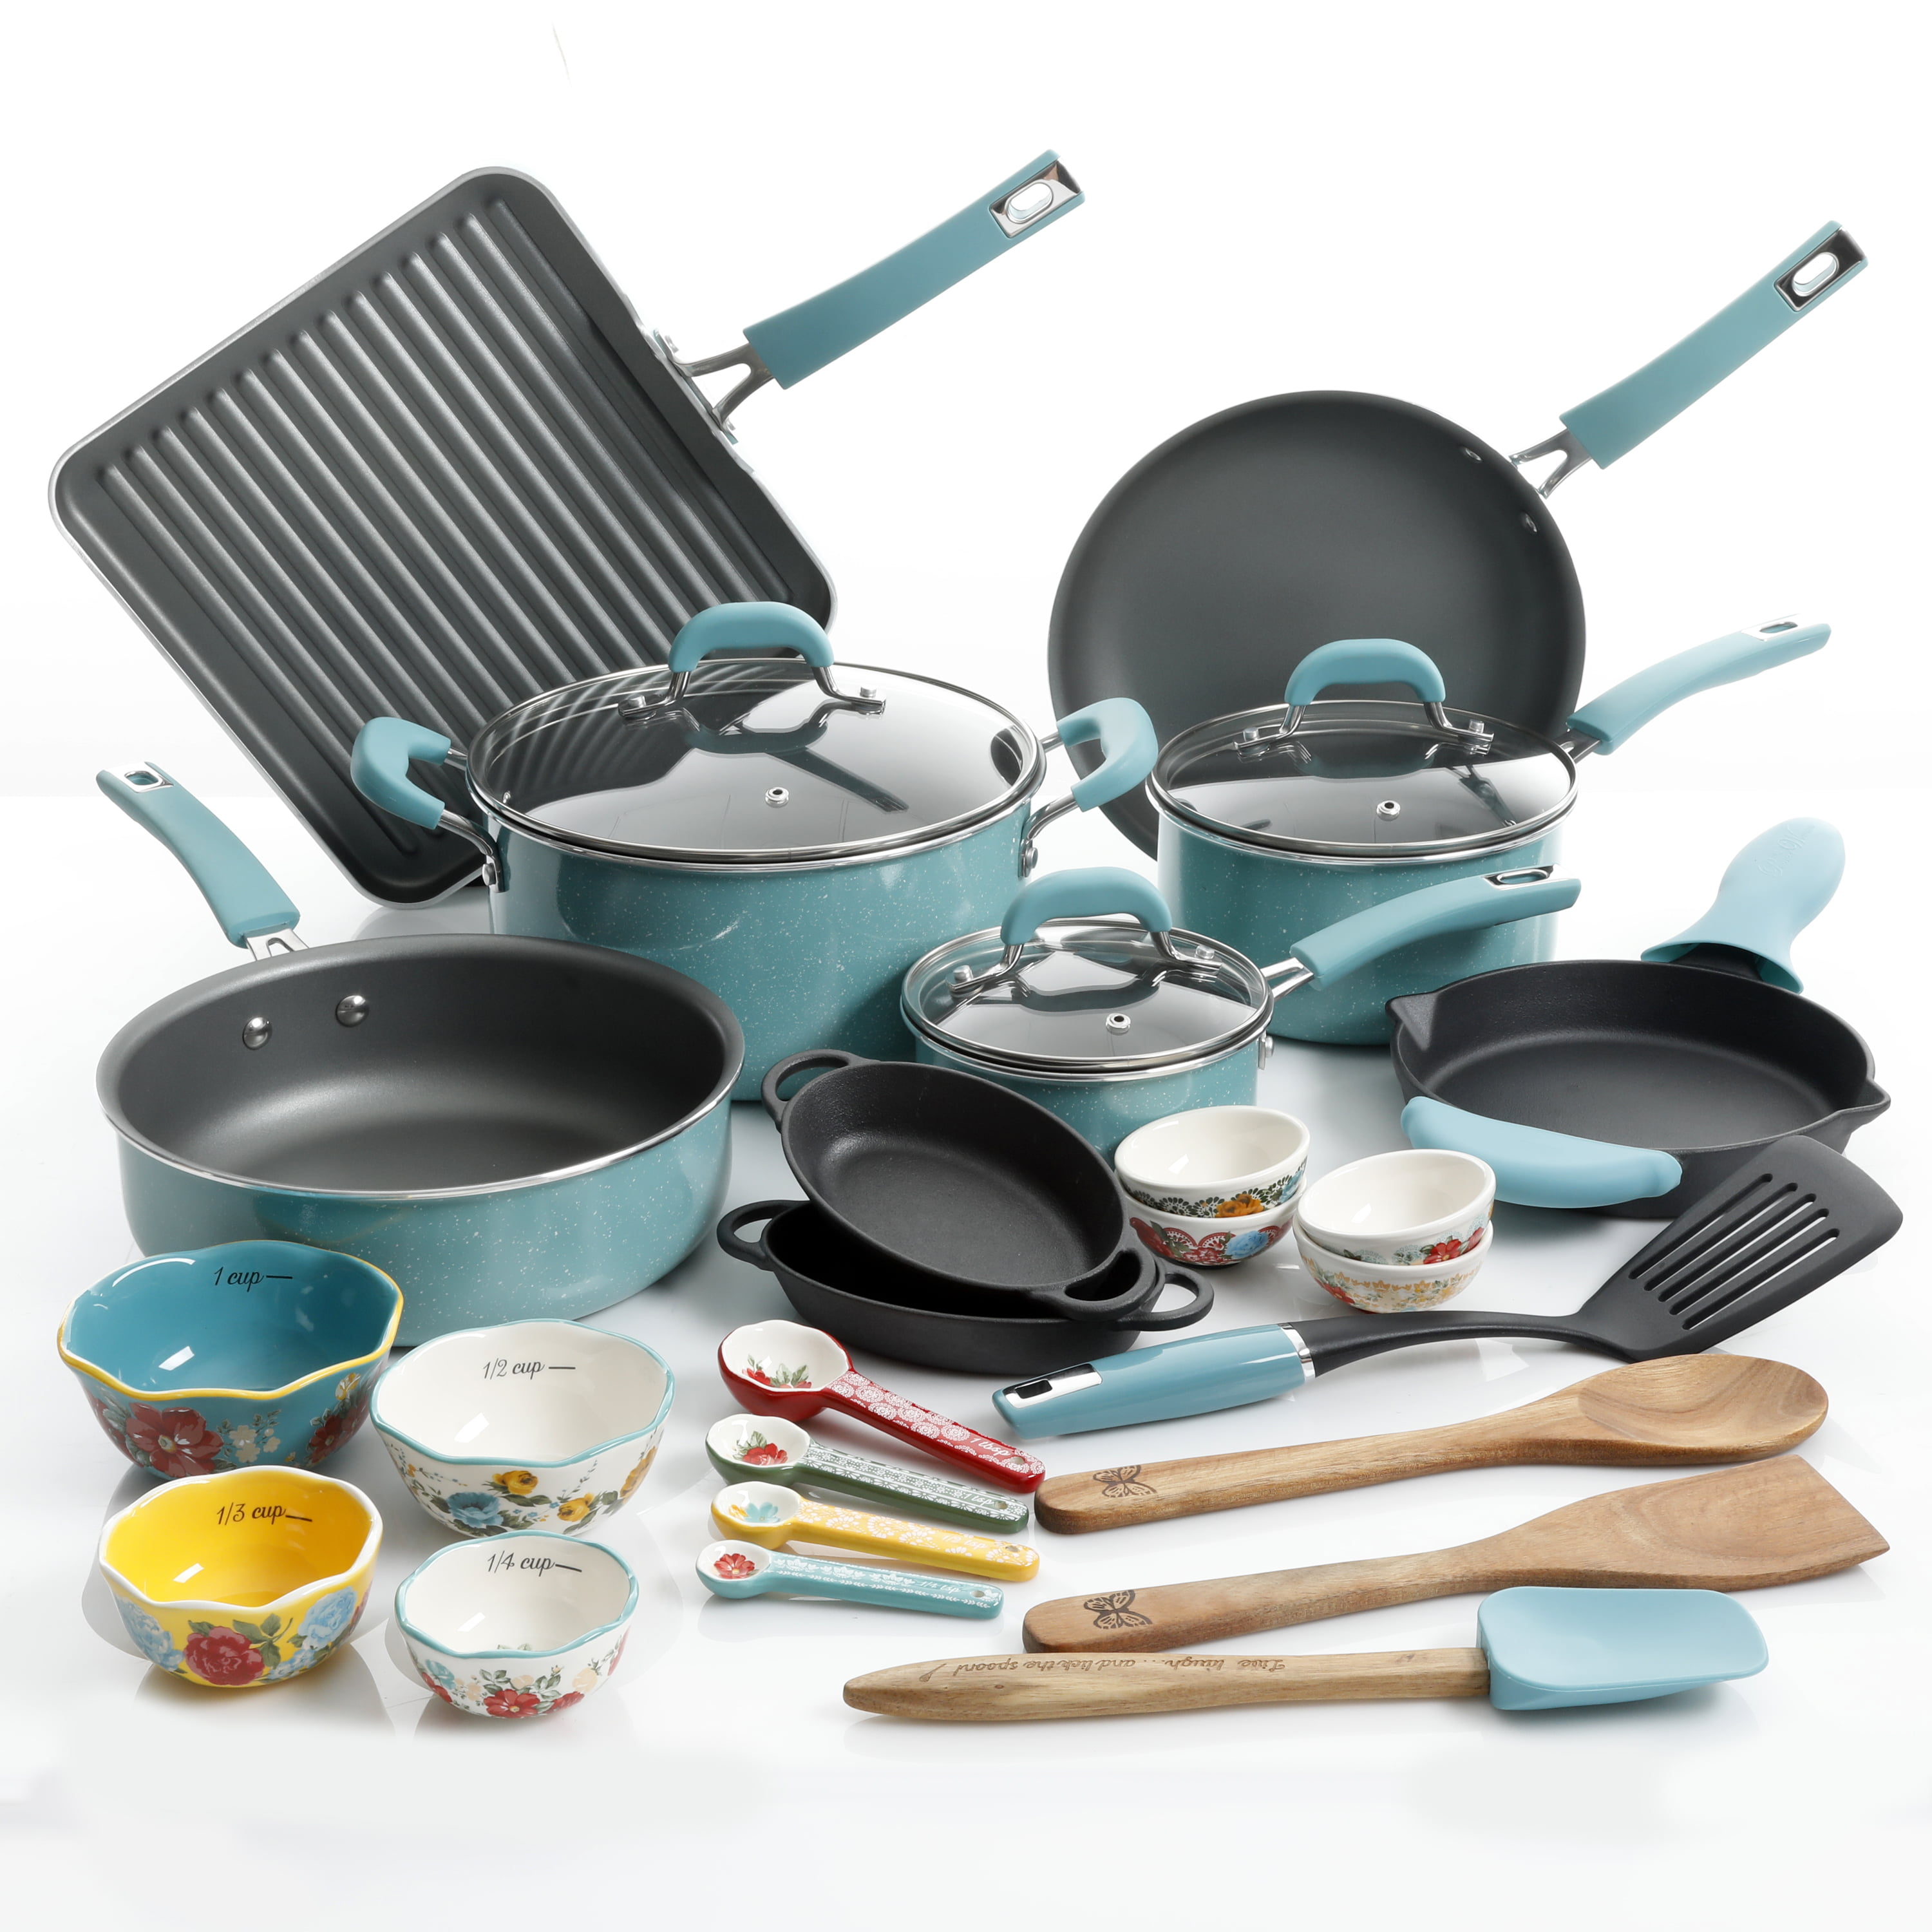 Deane And White Cookware Review: Should You Buy? - All Good Kitchen